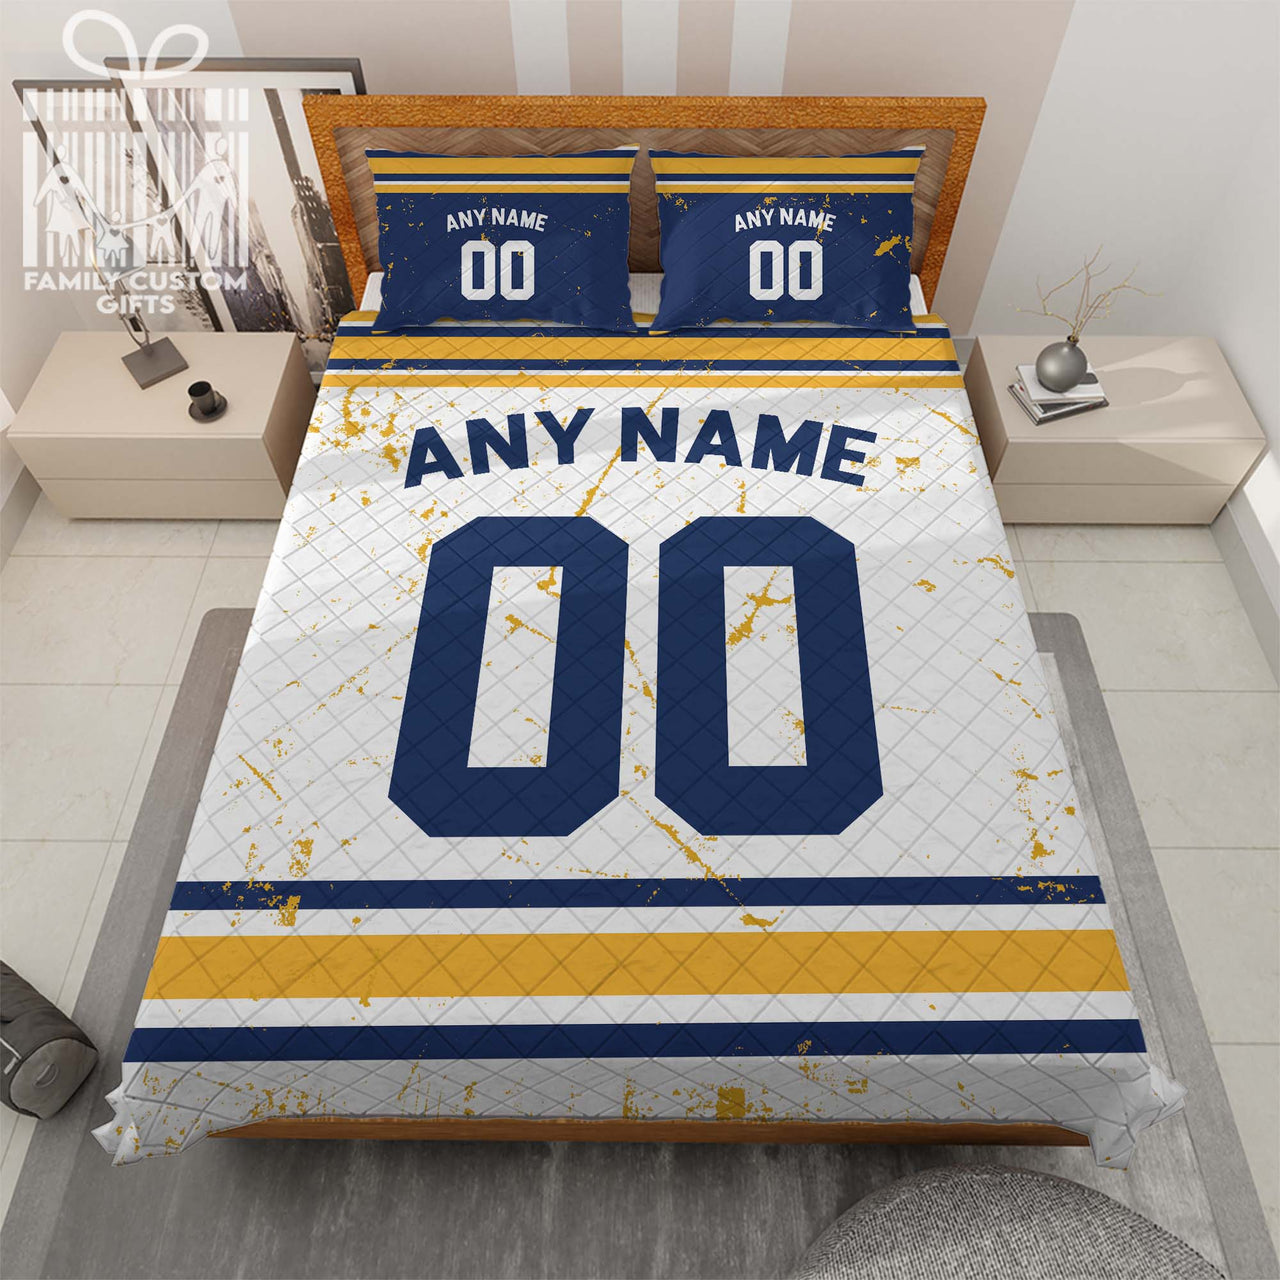 Custom Quilt Sets Buffalo Jersey Personalized Ice hockey Premium Quilt Bedding for Men Women